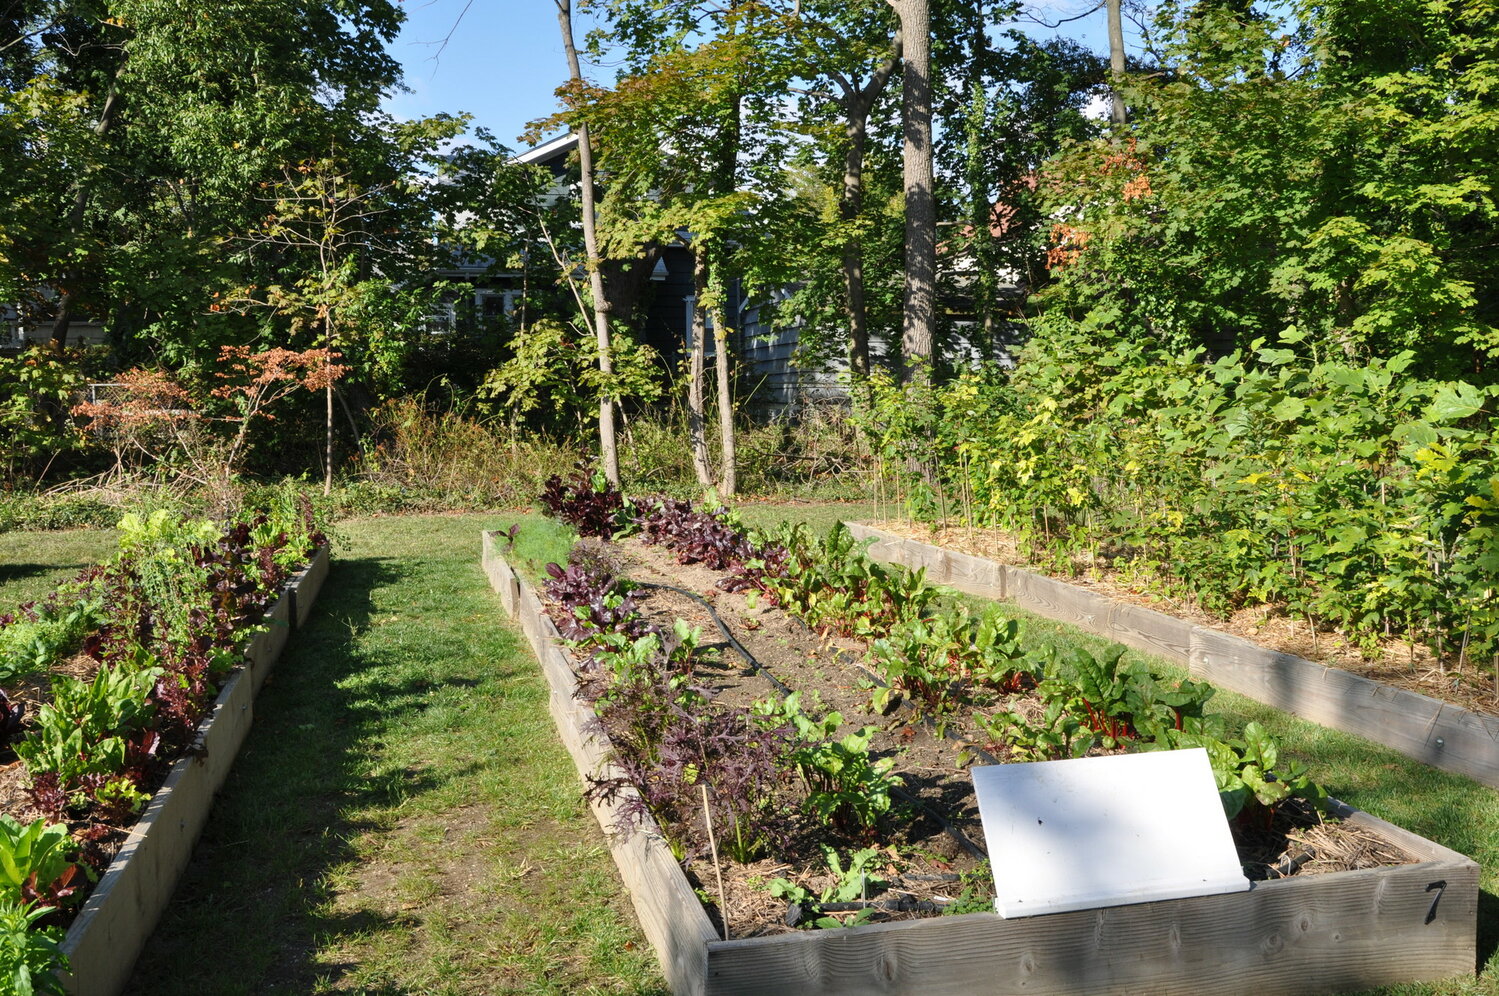 The Village of Valley Stream is transforming an overlooked parcel of land into its first community garden. Above, a community garden in the South Shore.